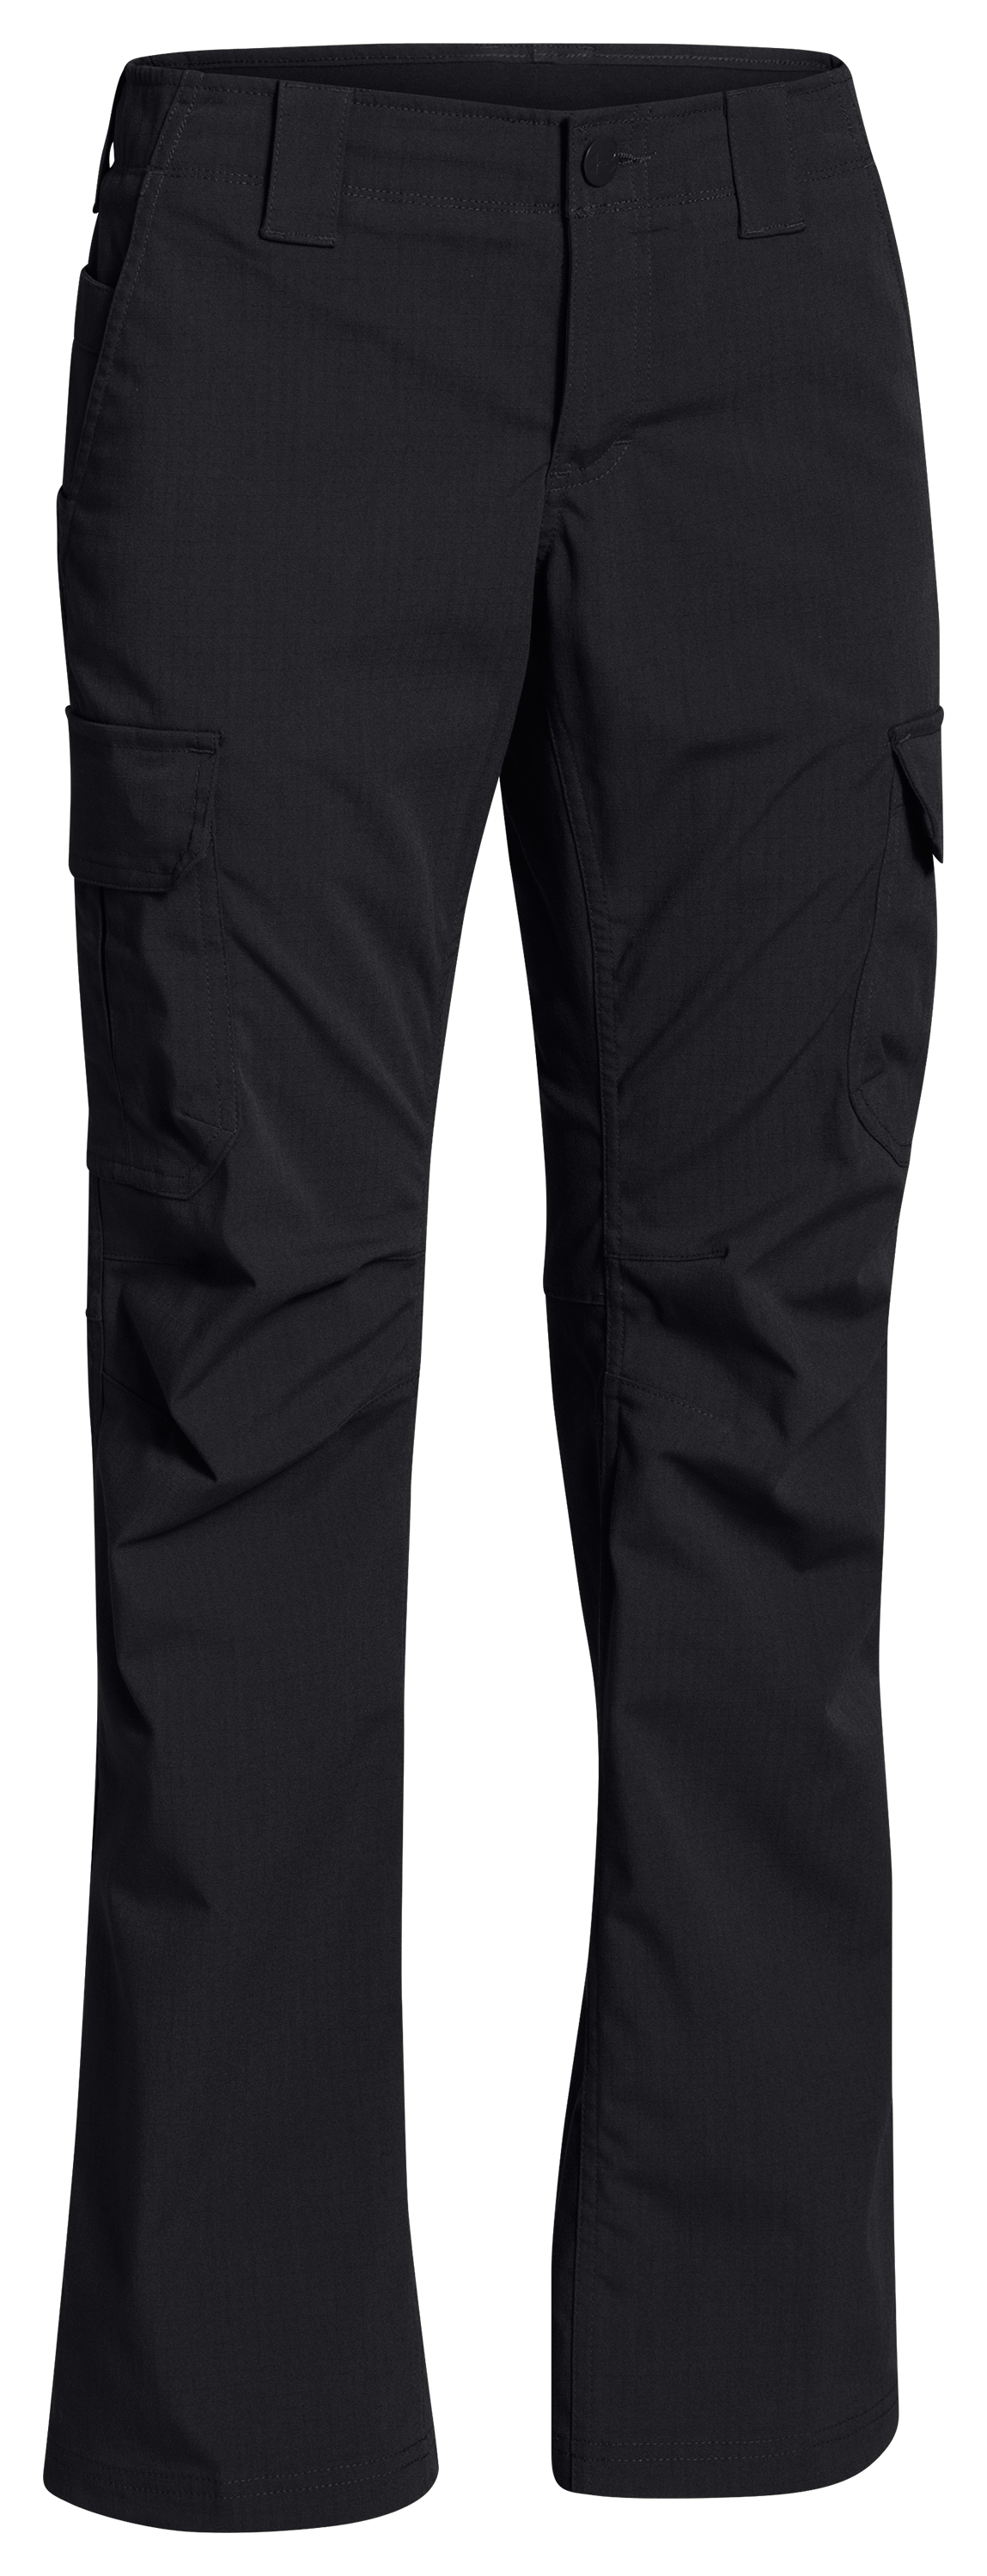 1254097-220] Womens Under Armour Tactical Patrol Pants